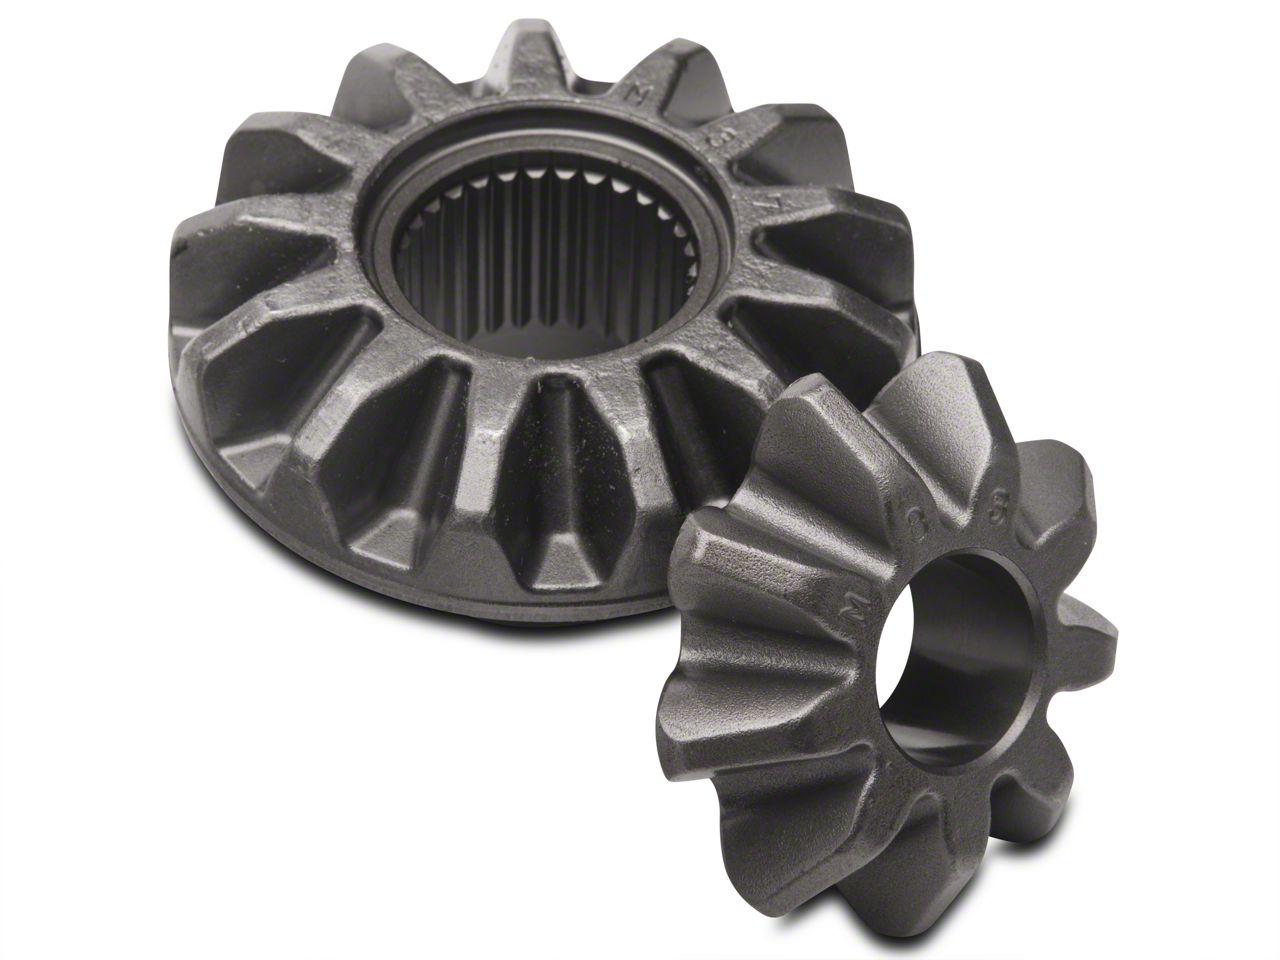 Ford 8.8 posi spider gears #9